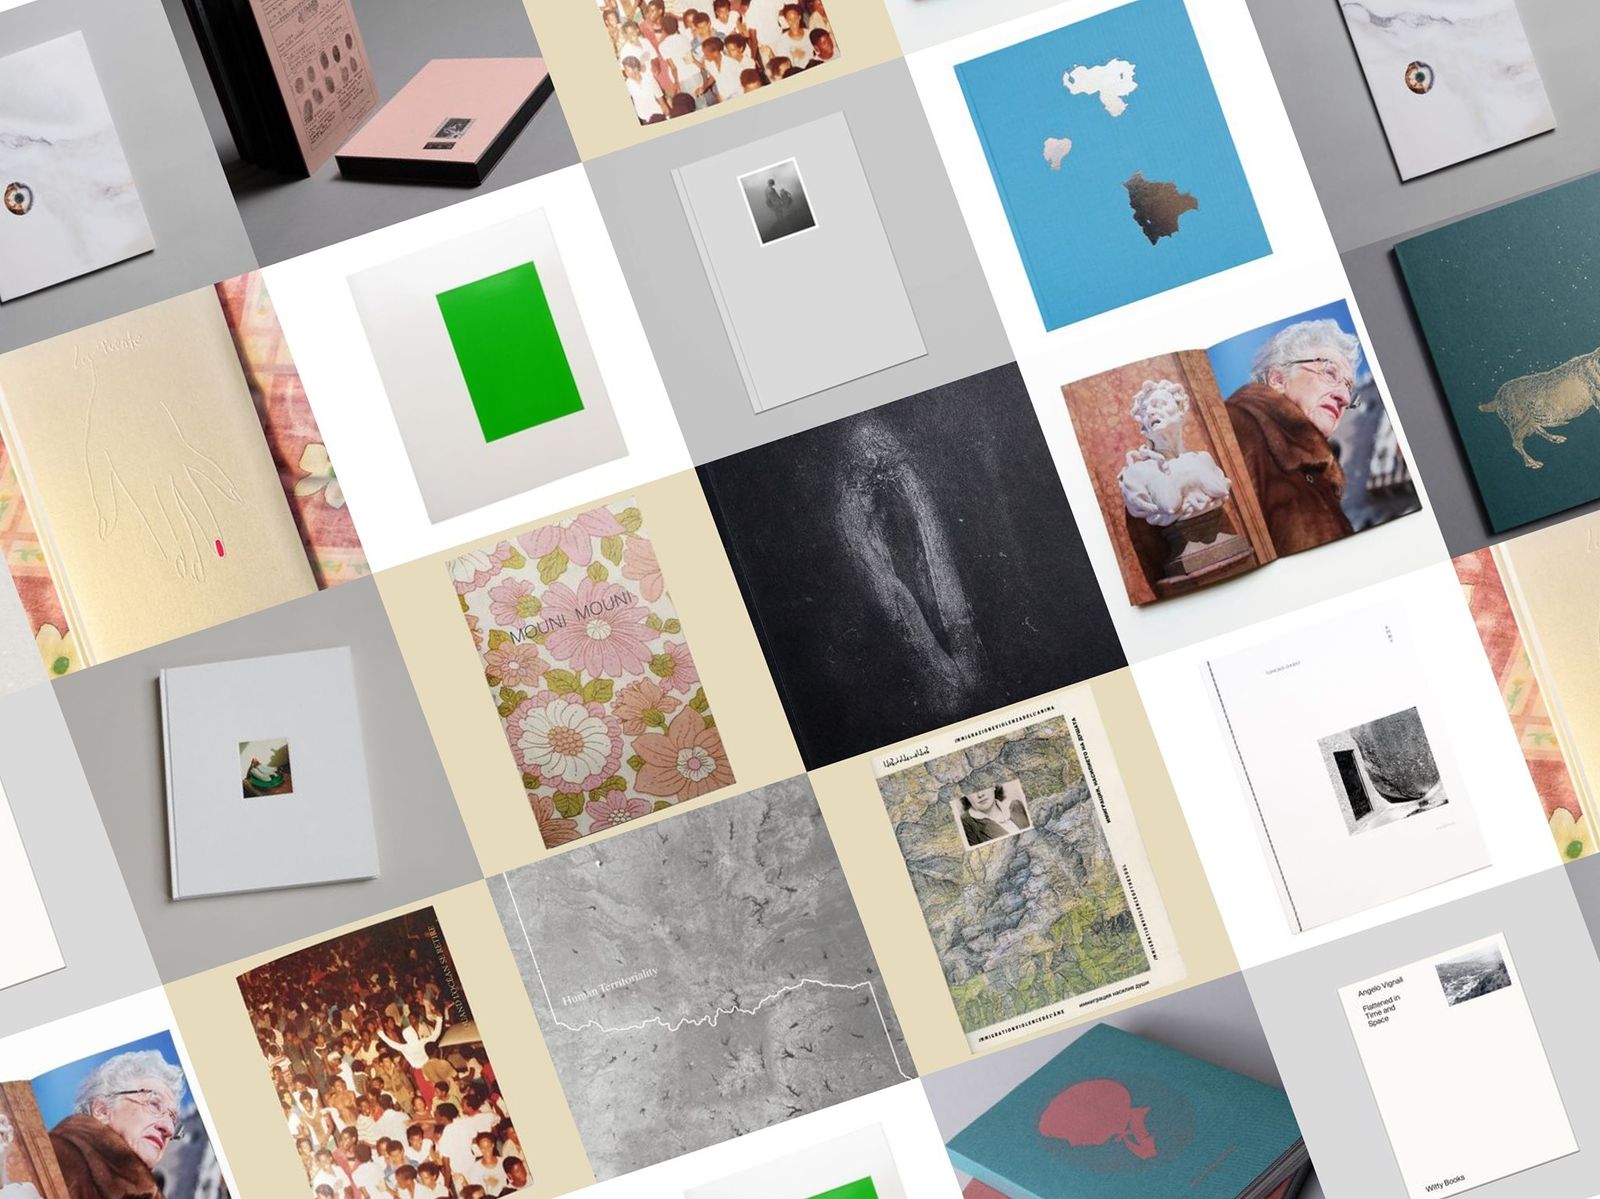 Front covers of the books on display in the Online Photobook Festival